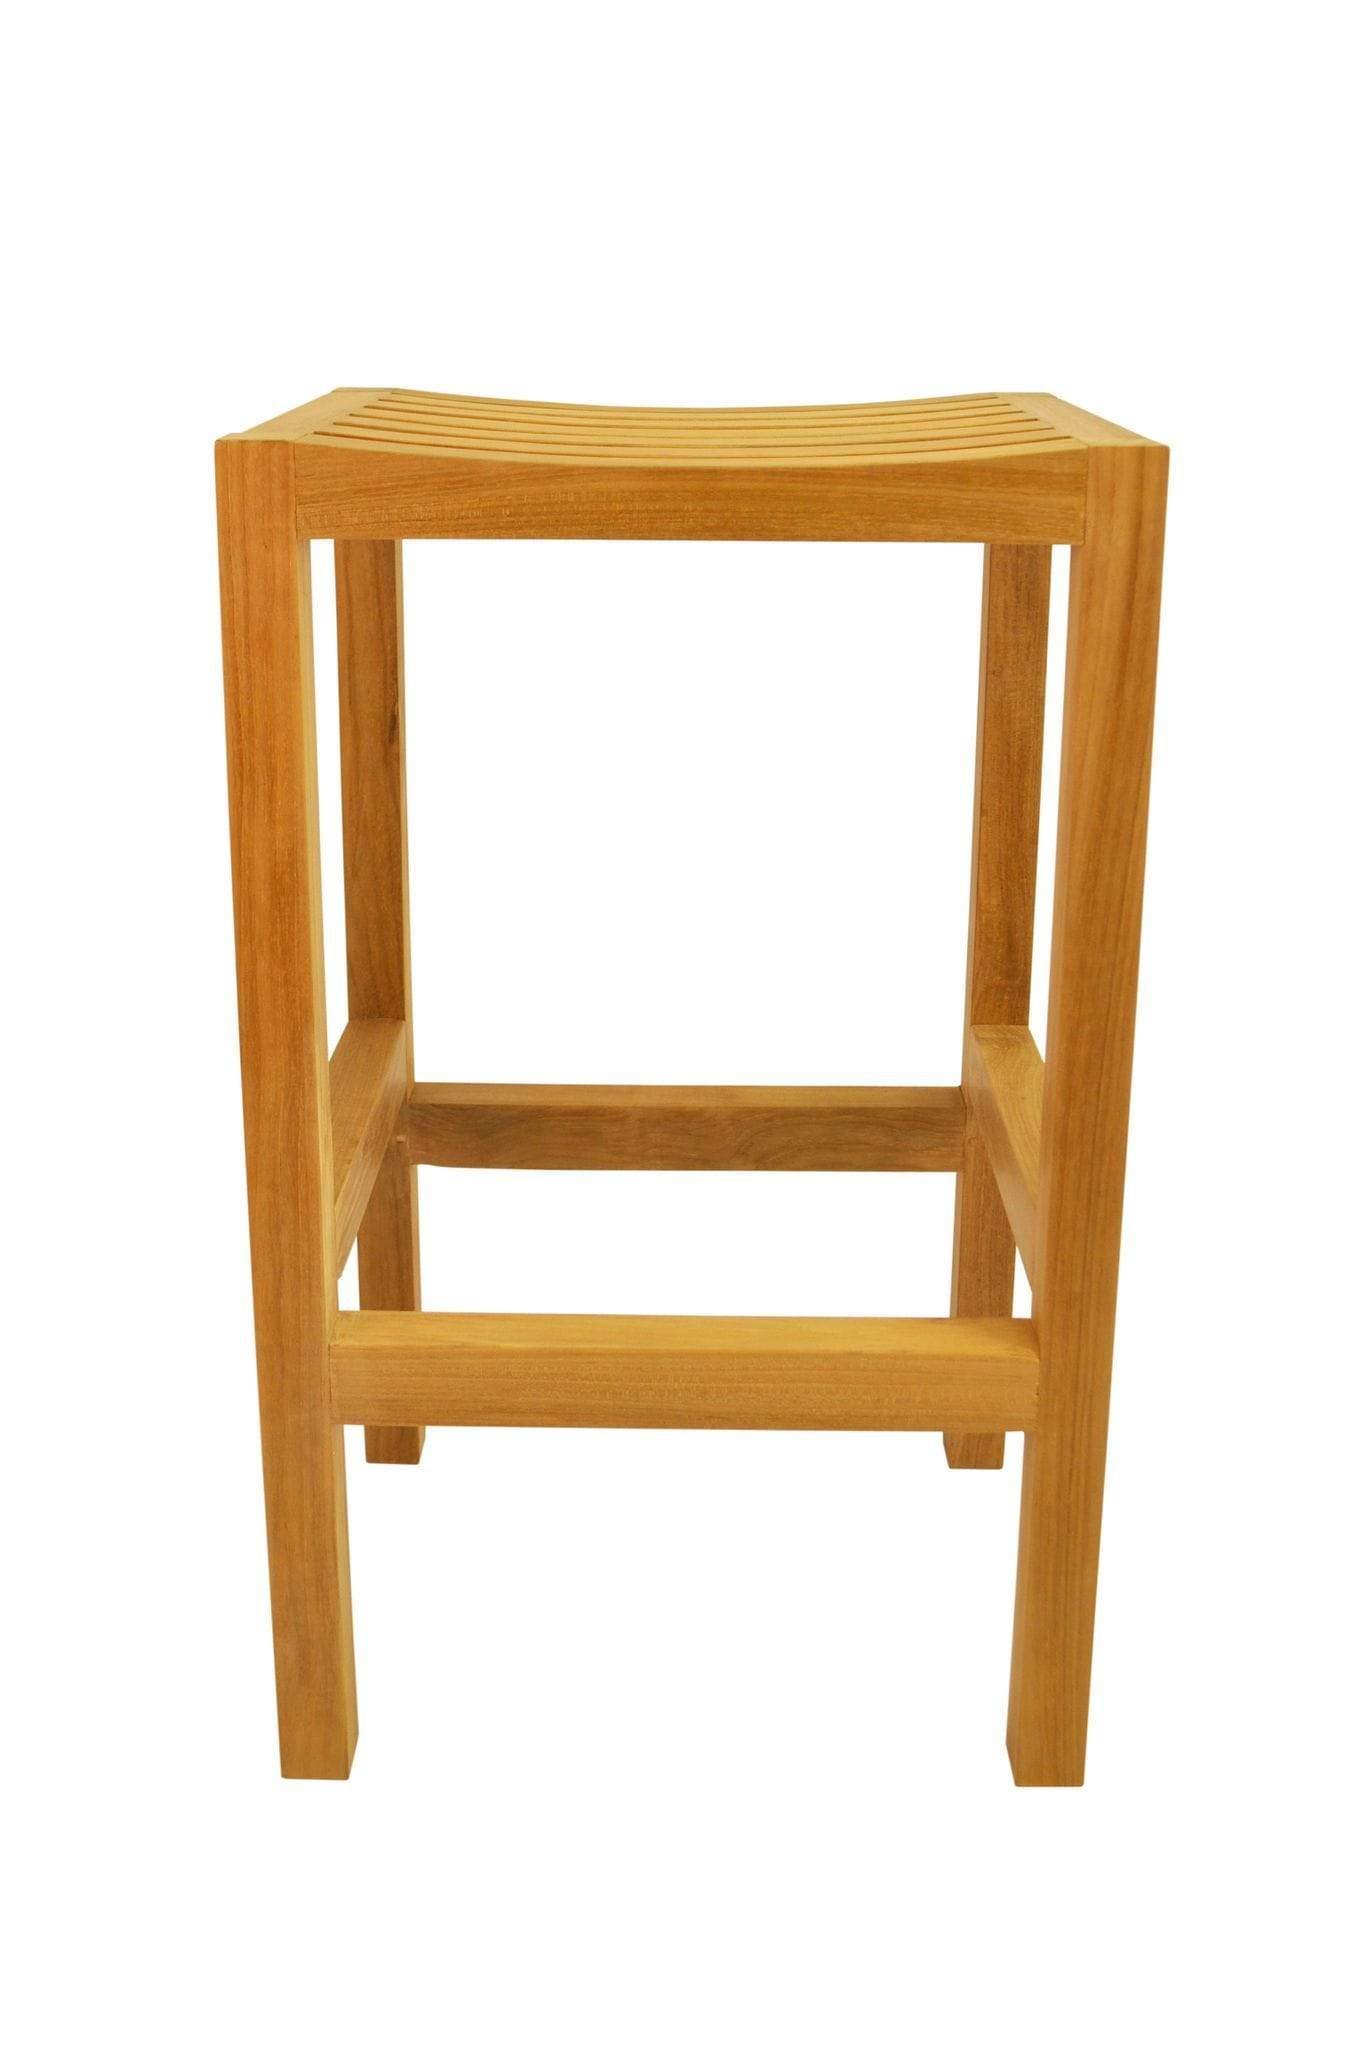 Anderson Teak Outdoor Chairs Anderson Teak New Montego Backless Bar Chair